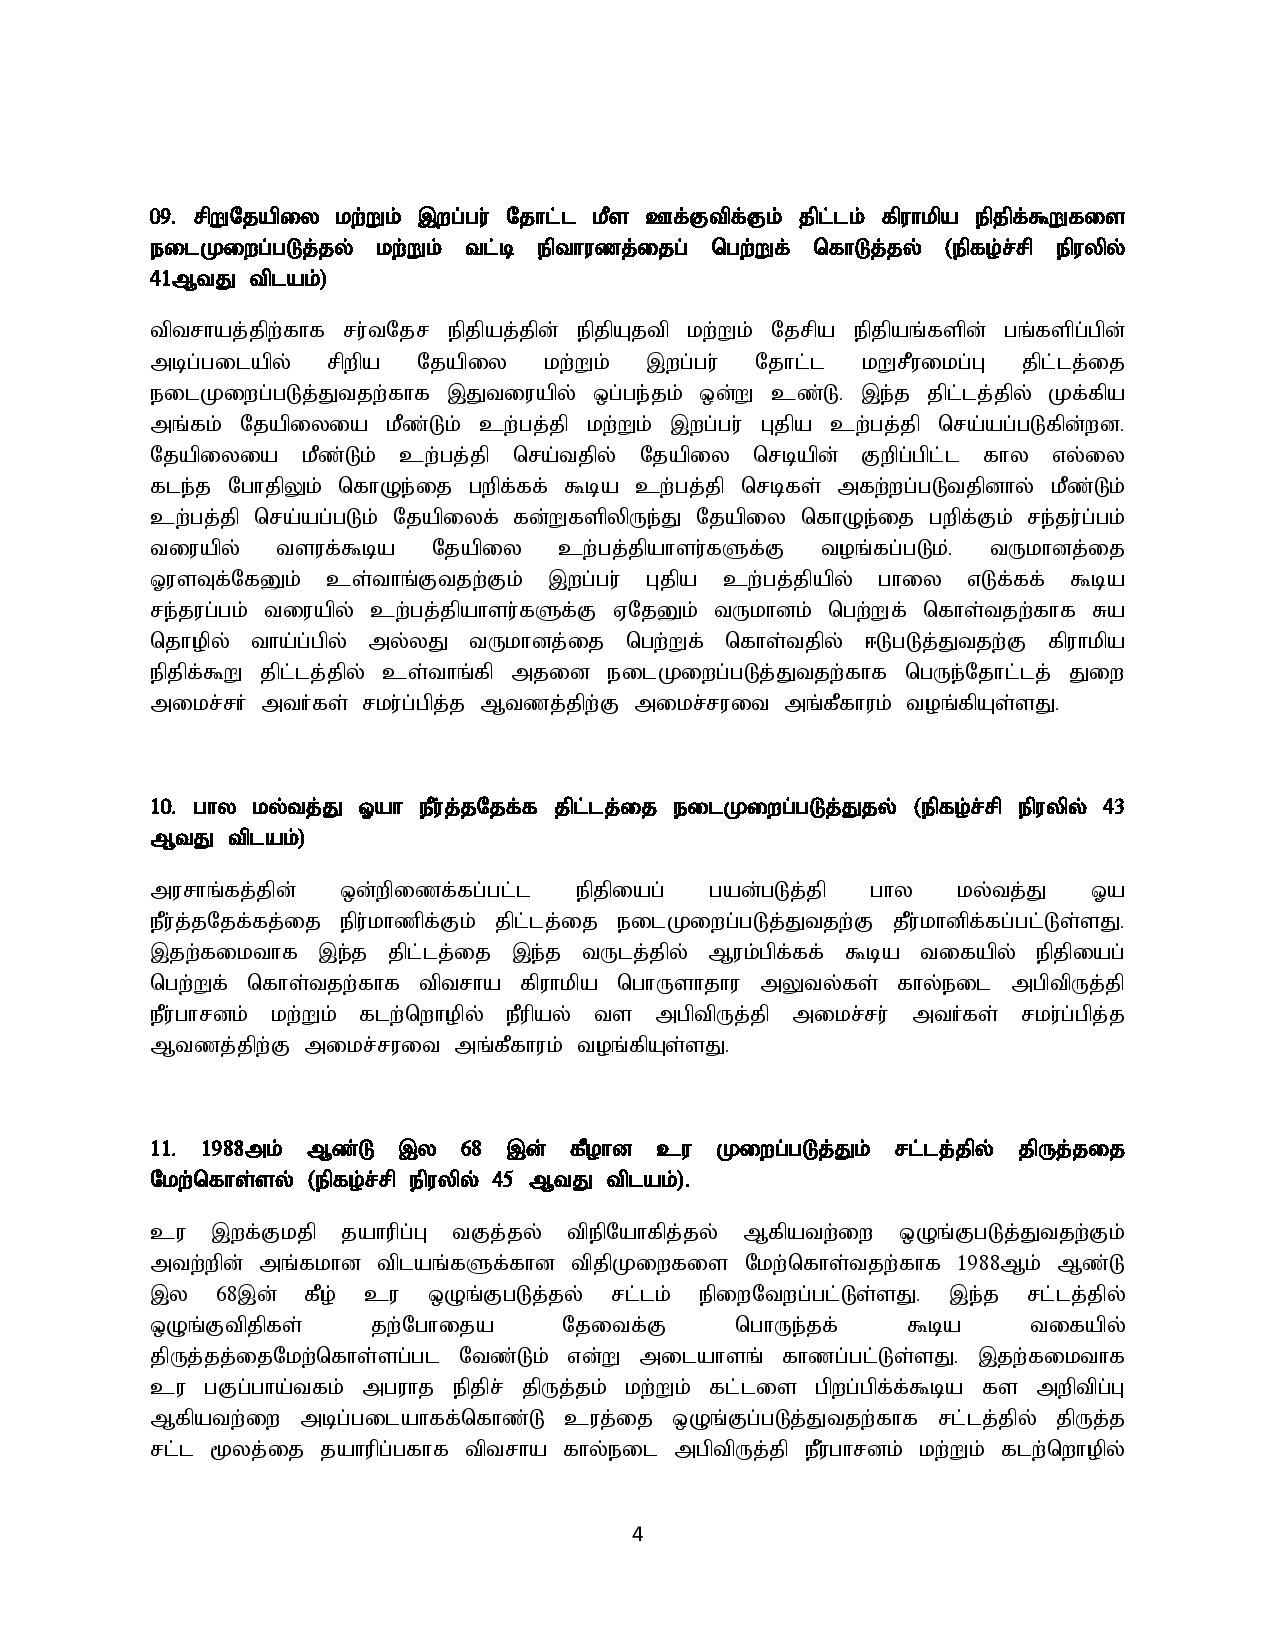 cabinet decision Tamil 19.07.2019 page 004